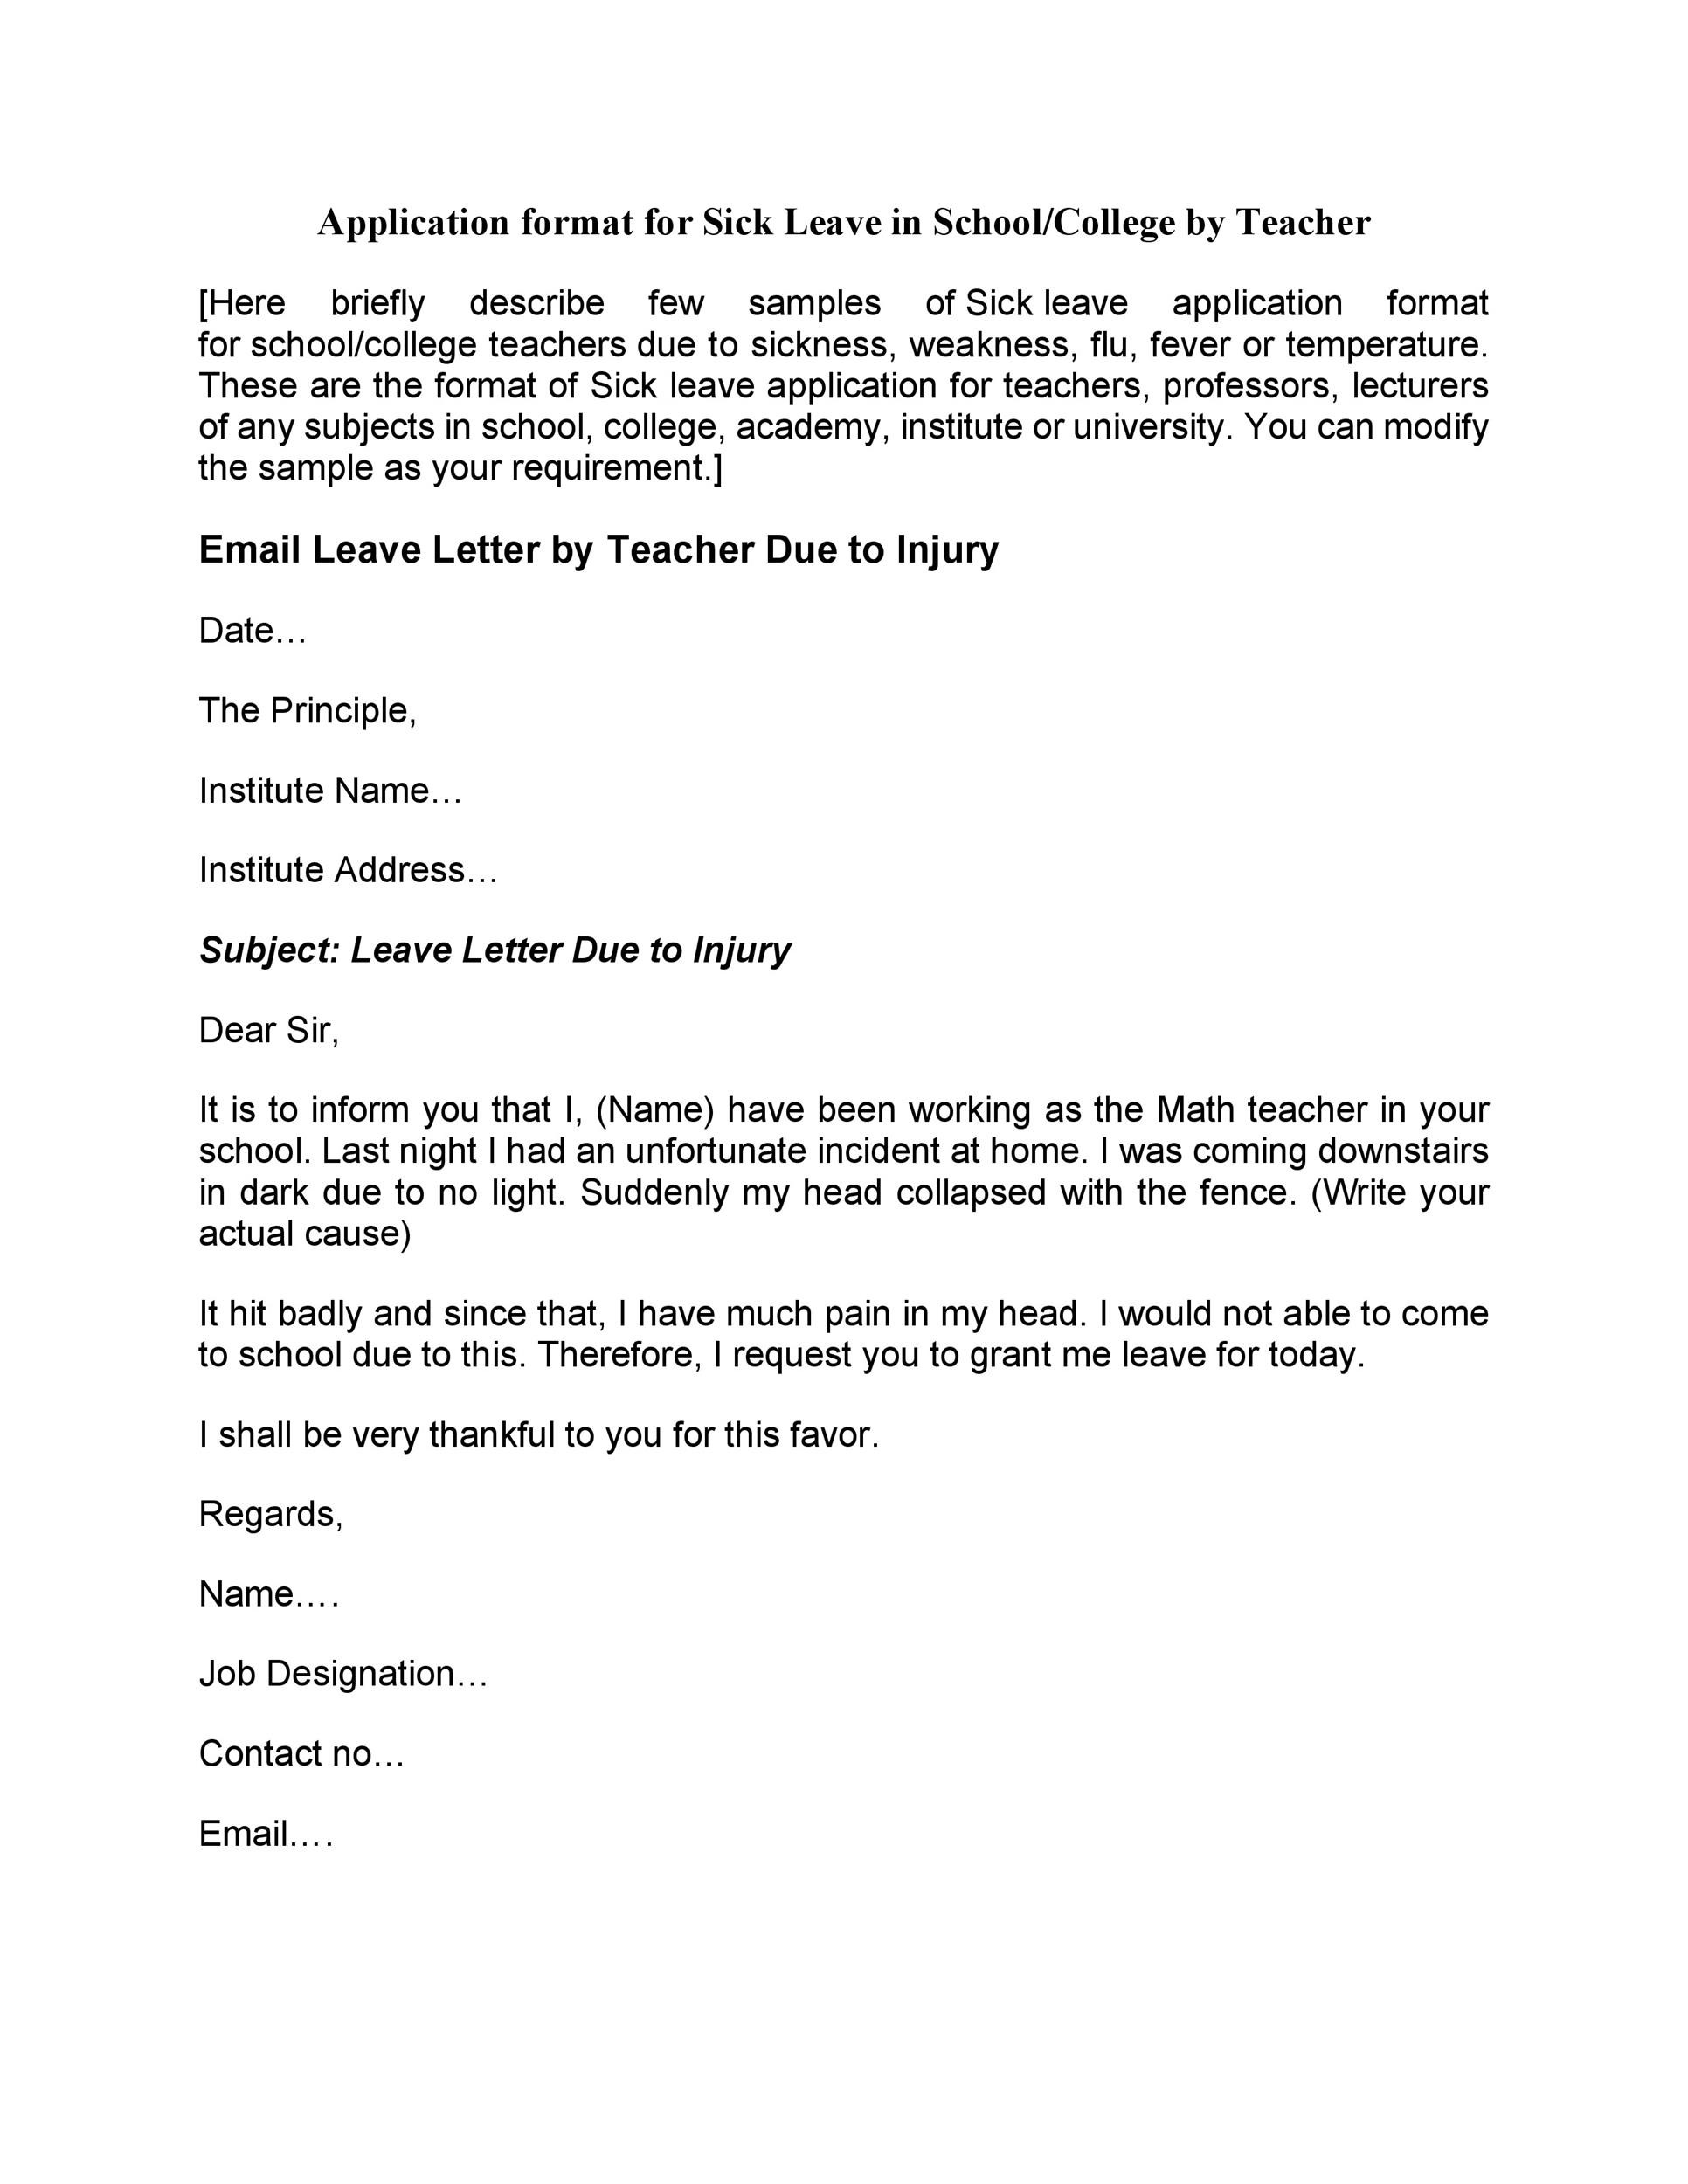 30 Professional Sick Leave Email Templates ᐅ TemplateLab